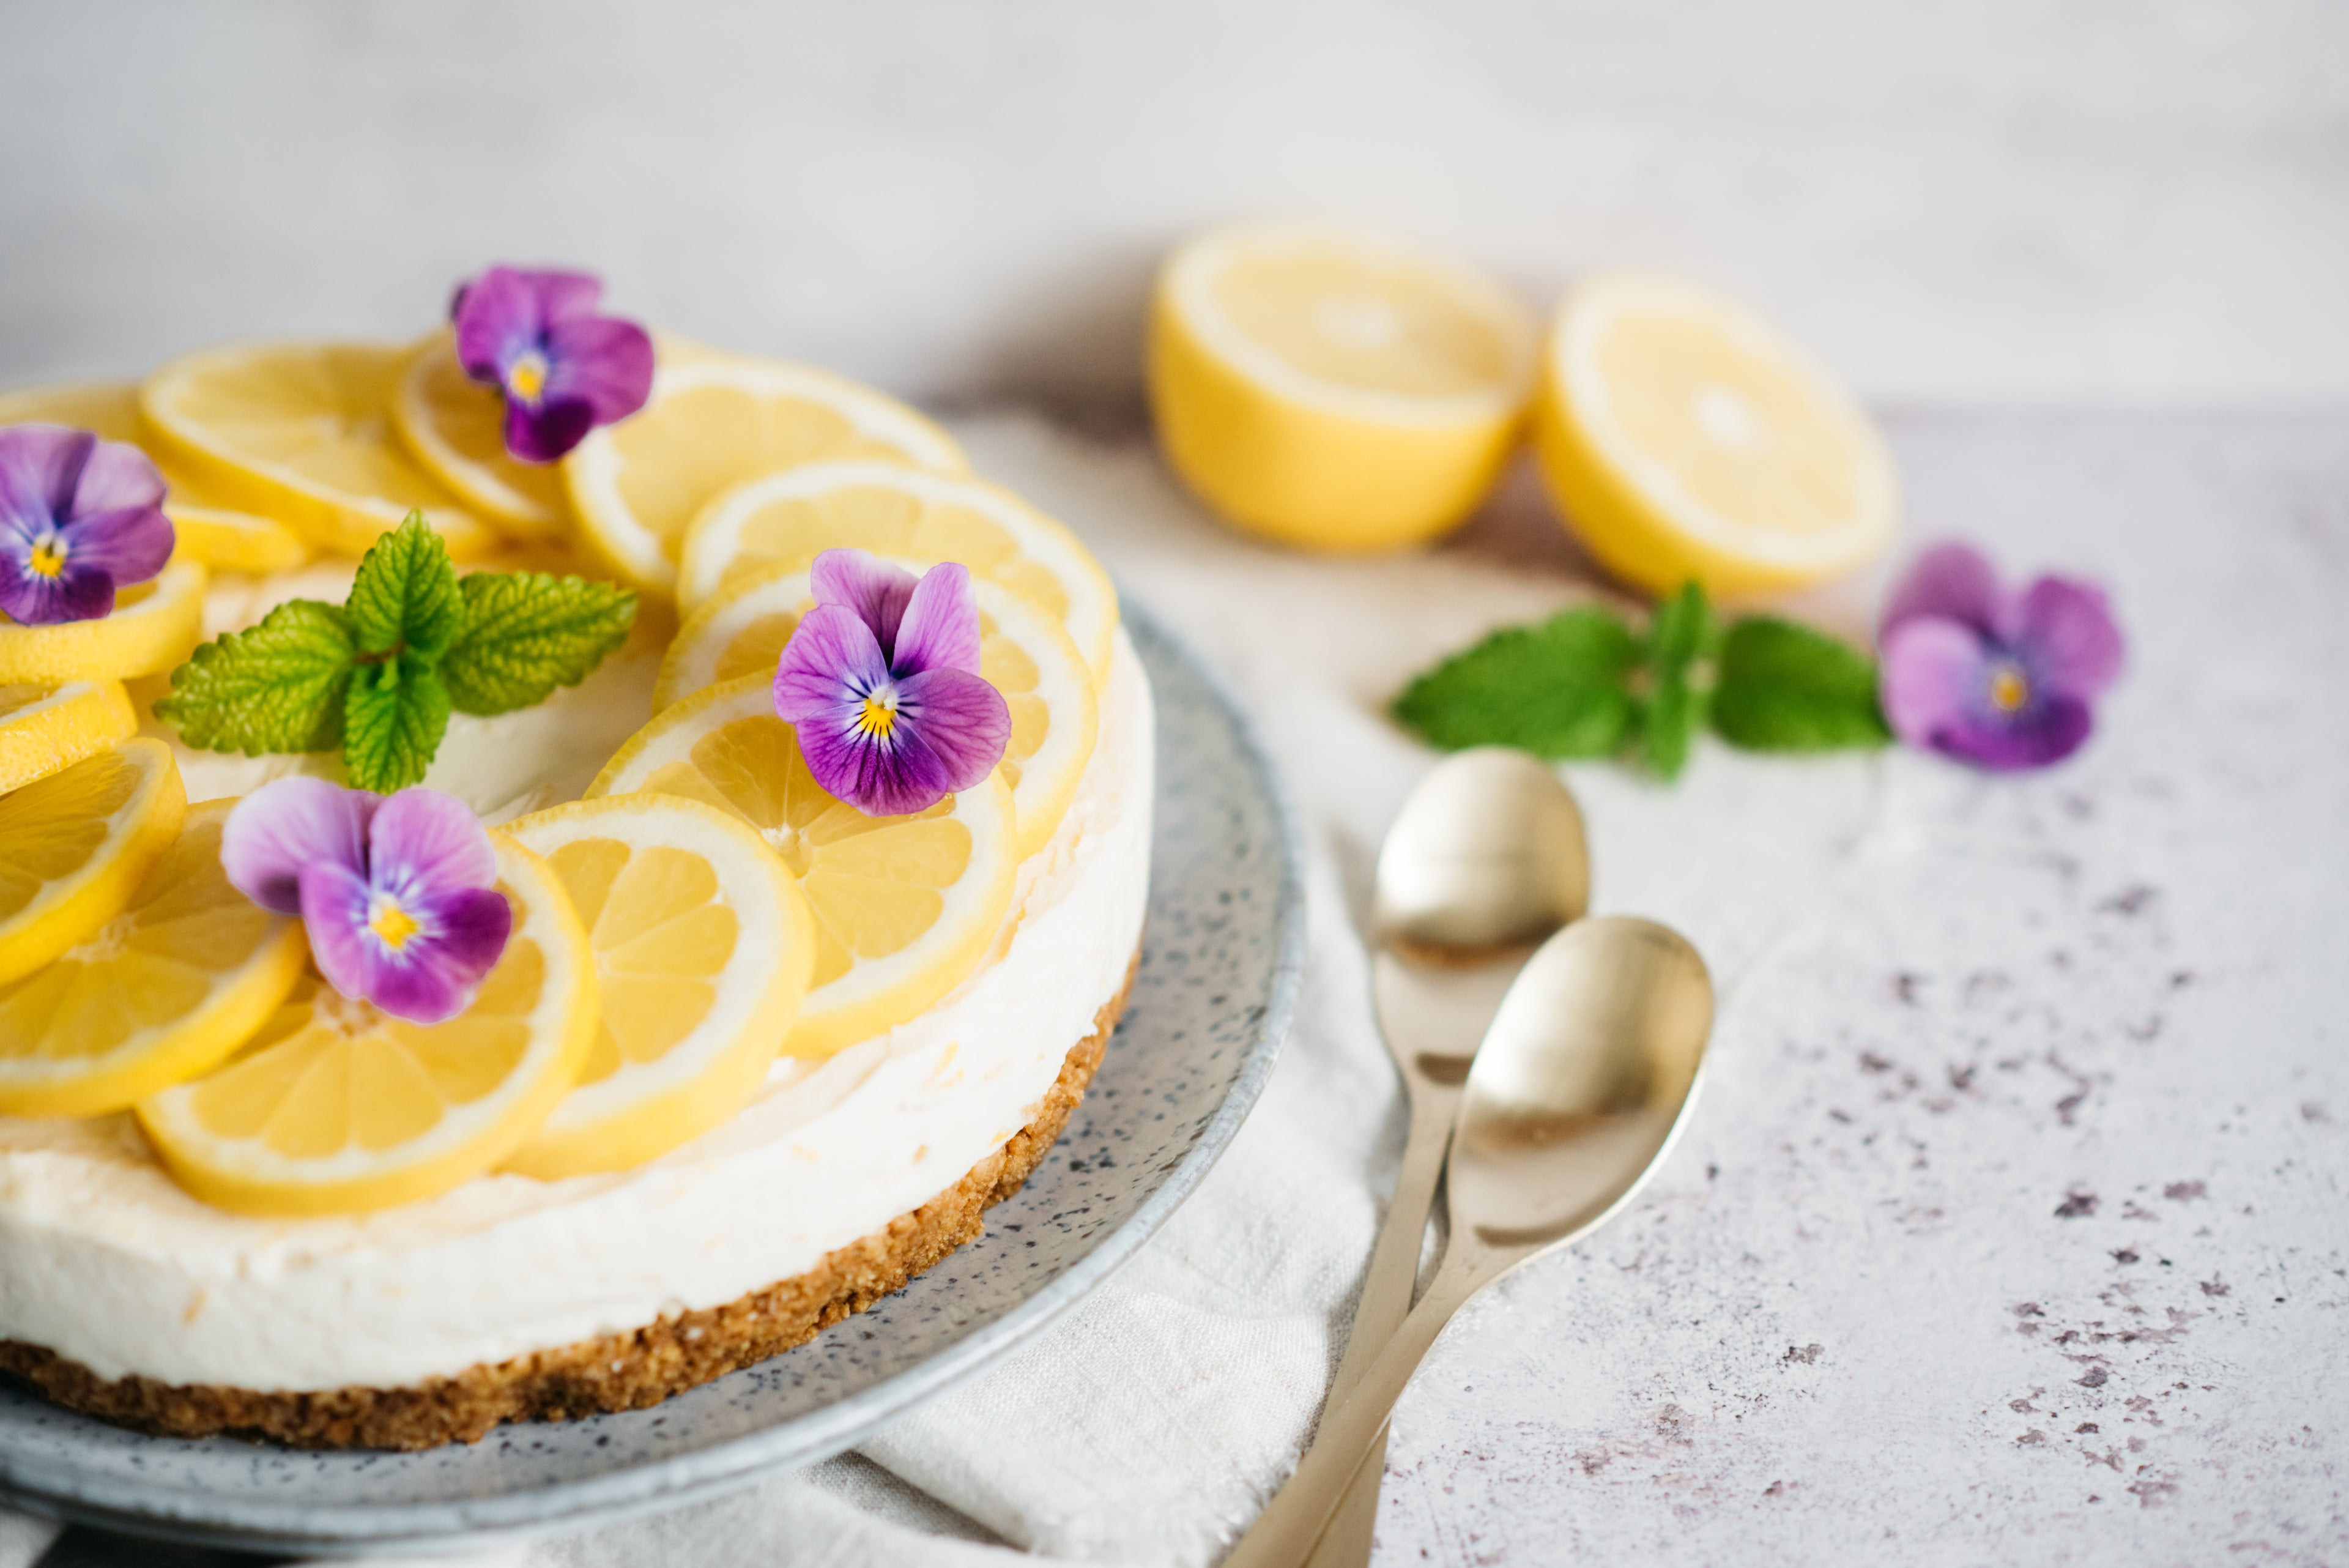 Close up of lemon cheesecake with purple flowers and lemon decoration and two spoons. Lemons in background